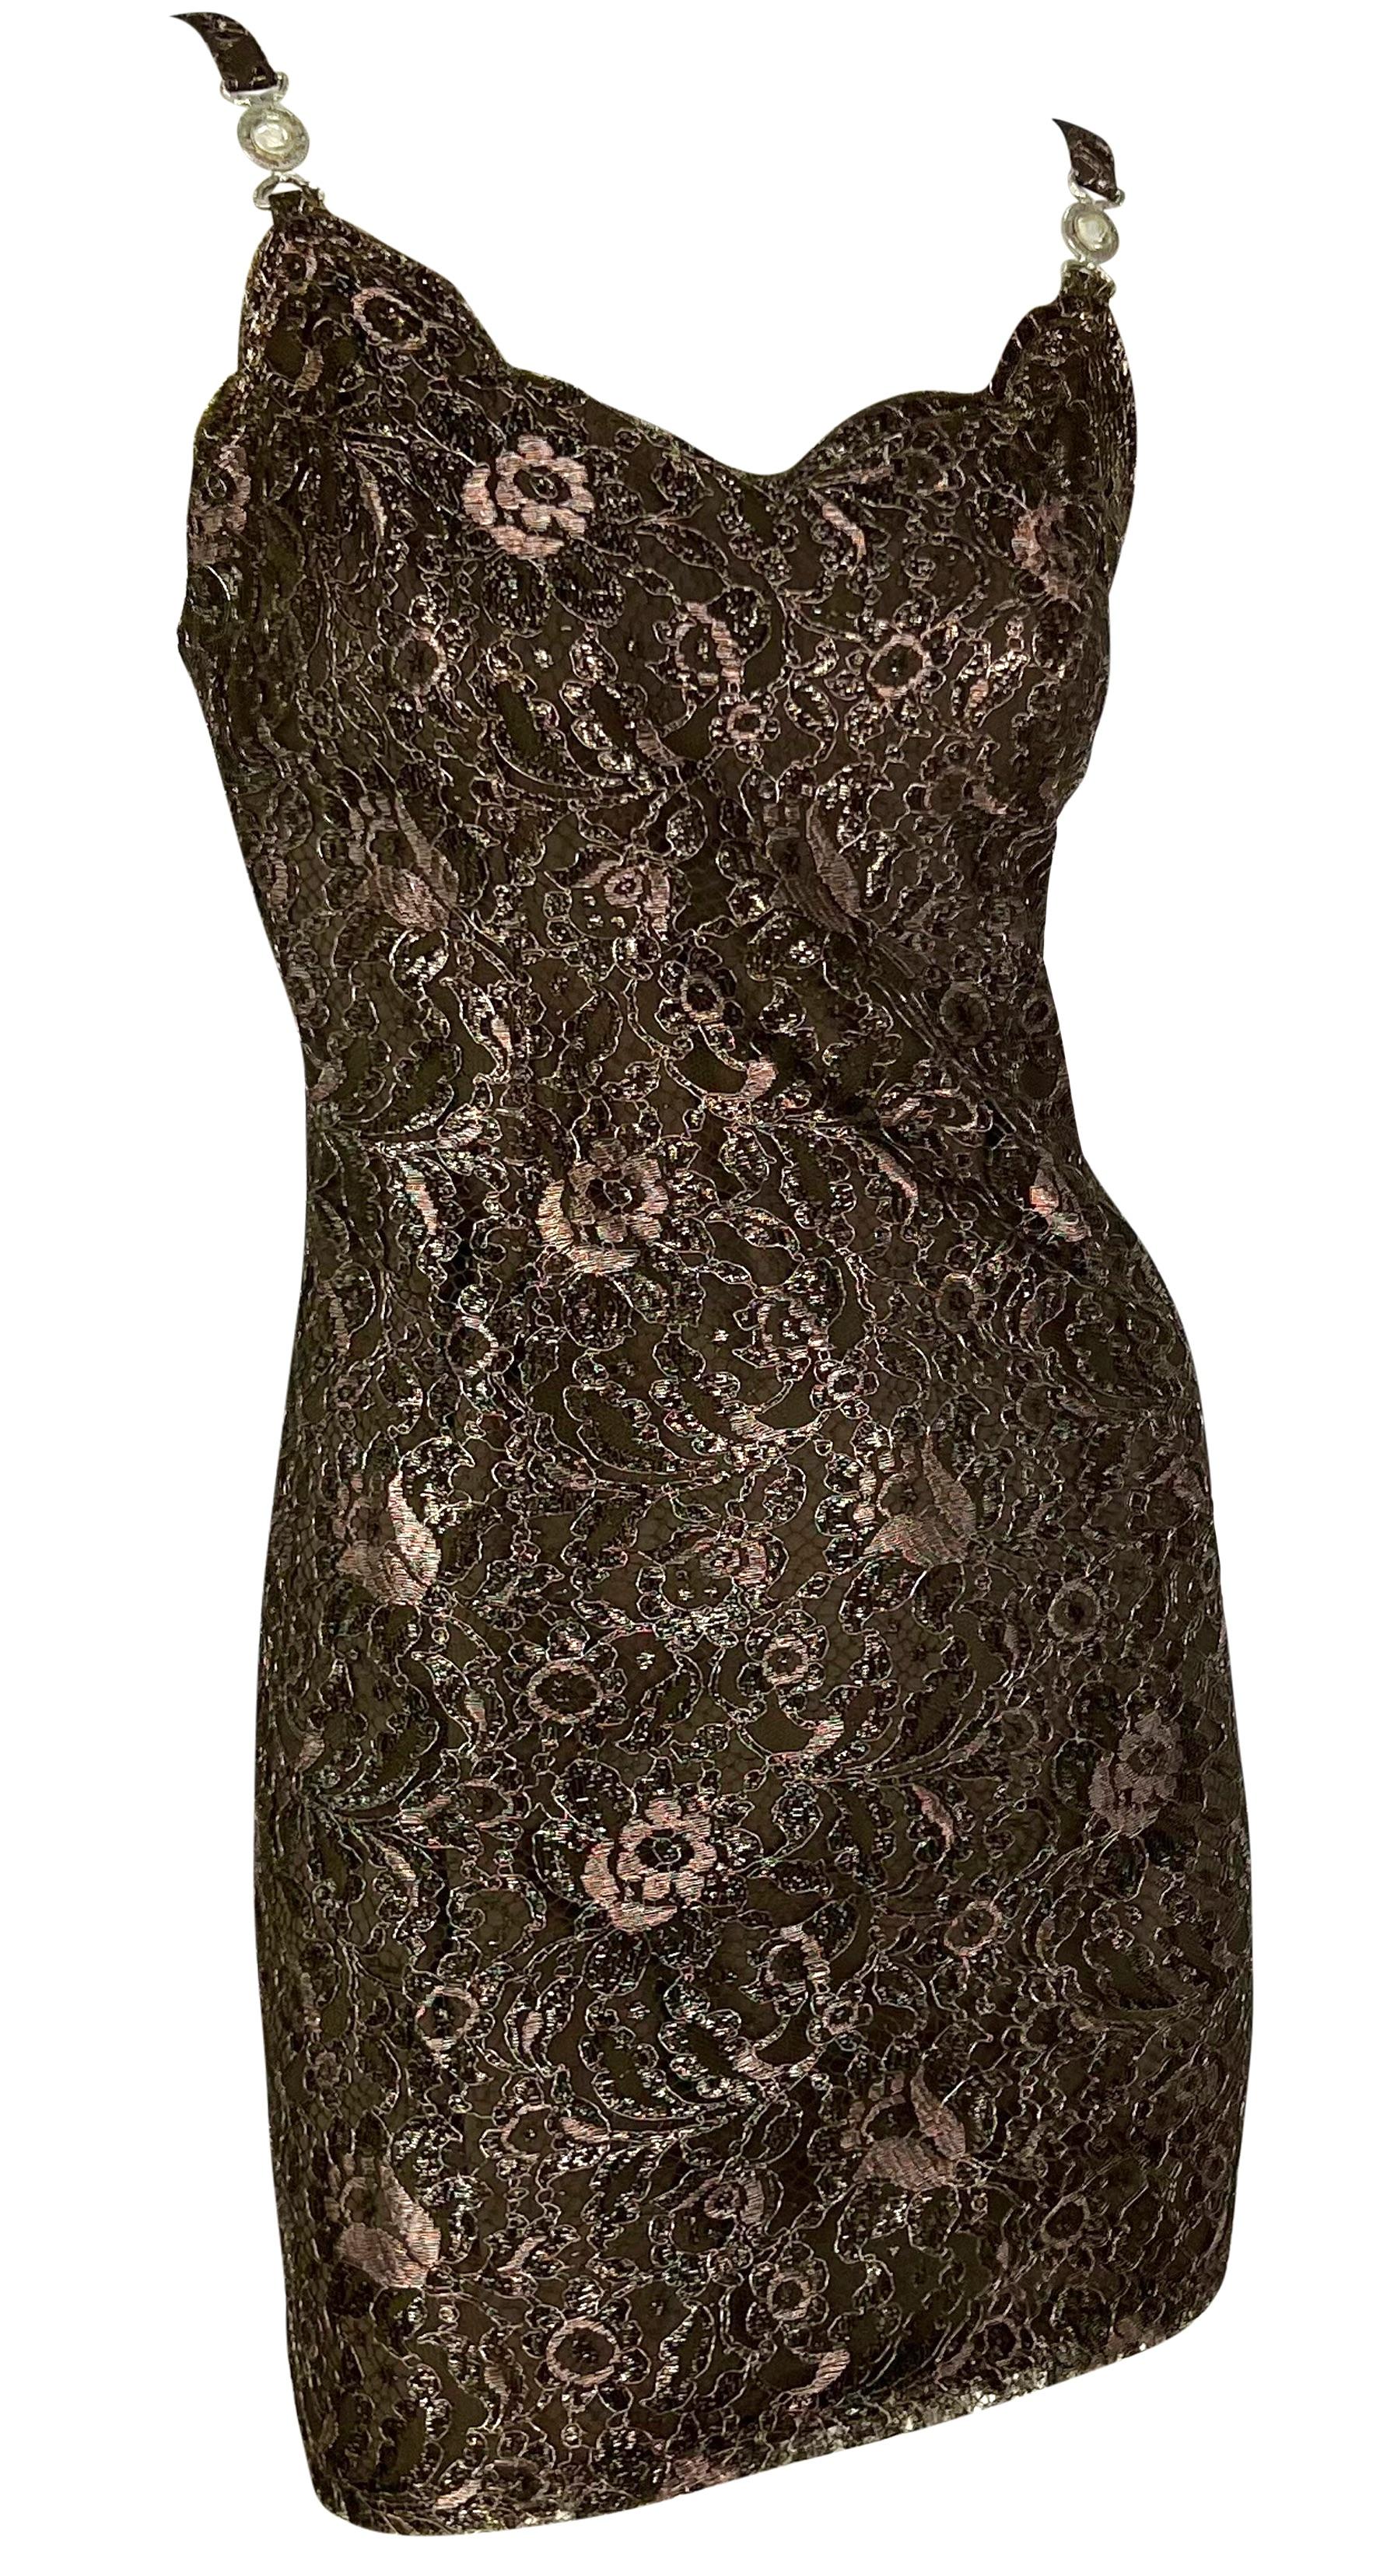 F/W 1996 Gianni Versace Couture Metallic Brown Floral Lace Medusa Mini Dress For Sale 3